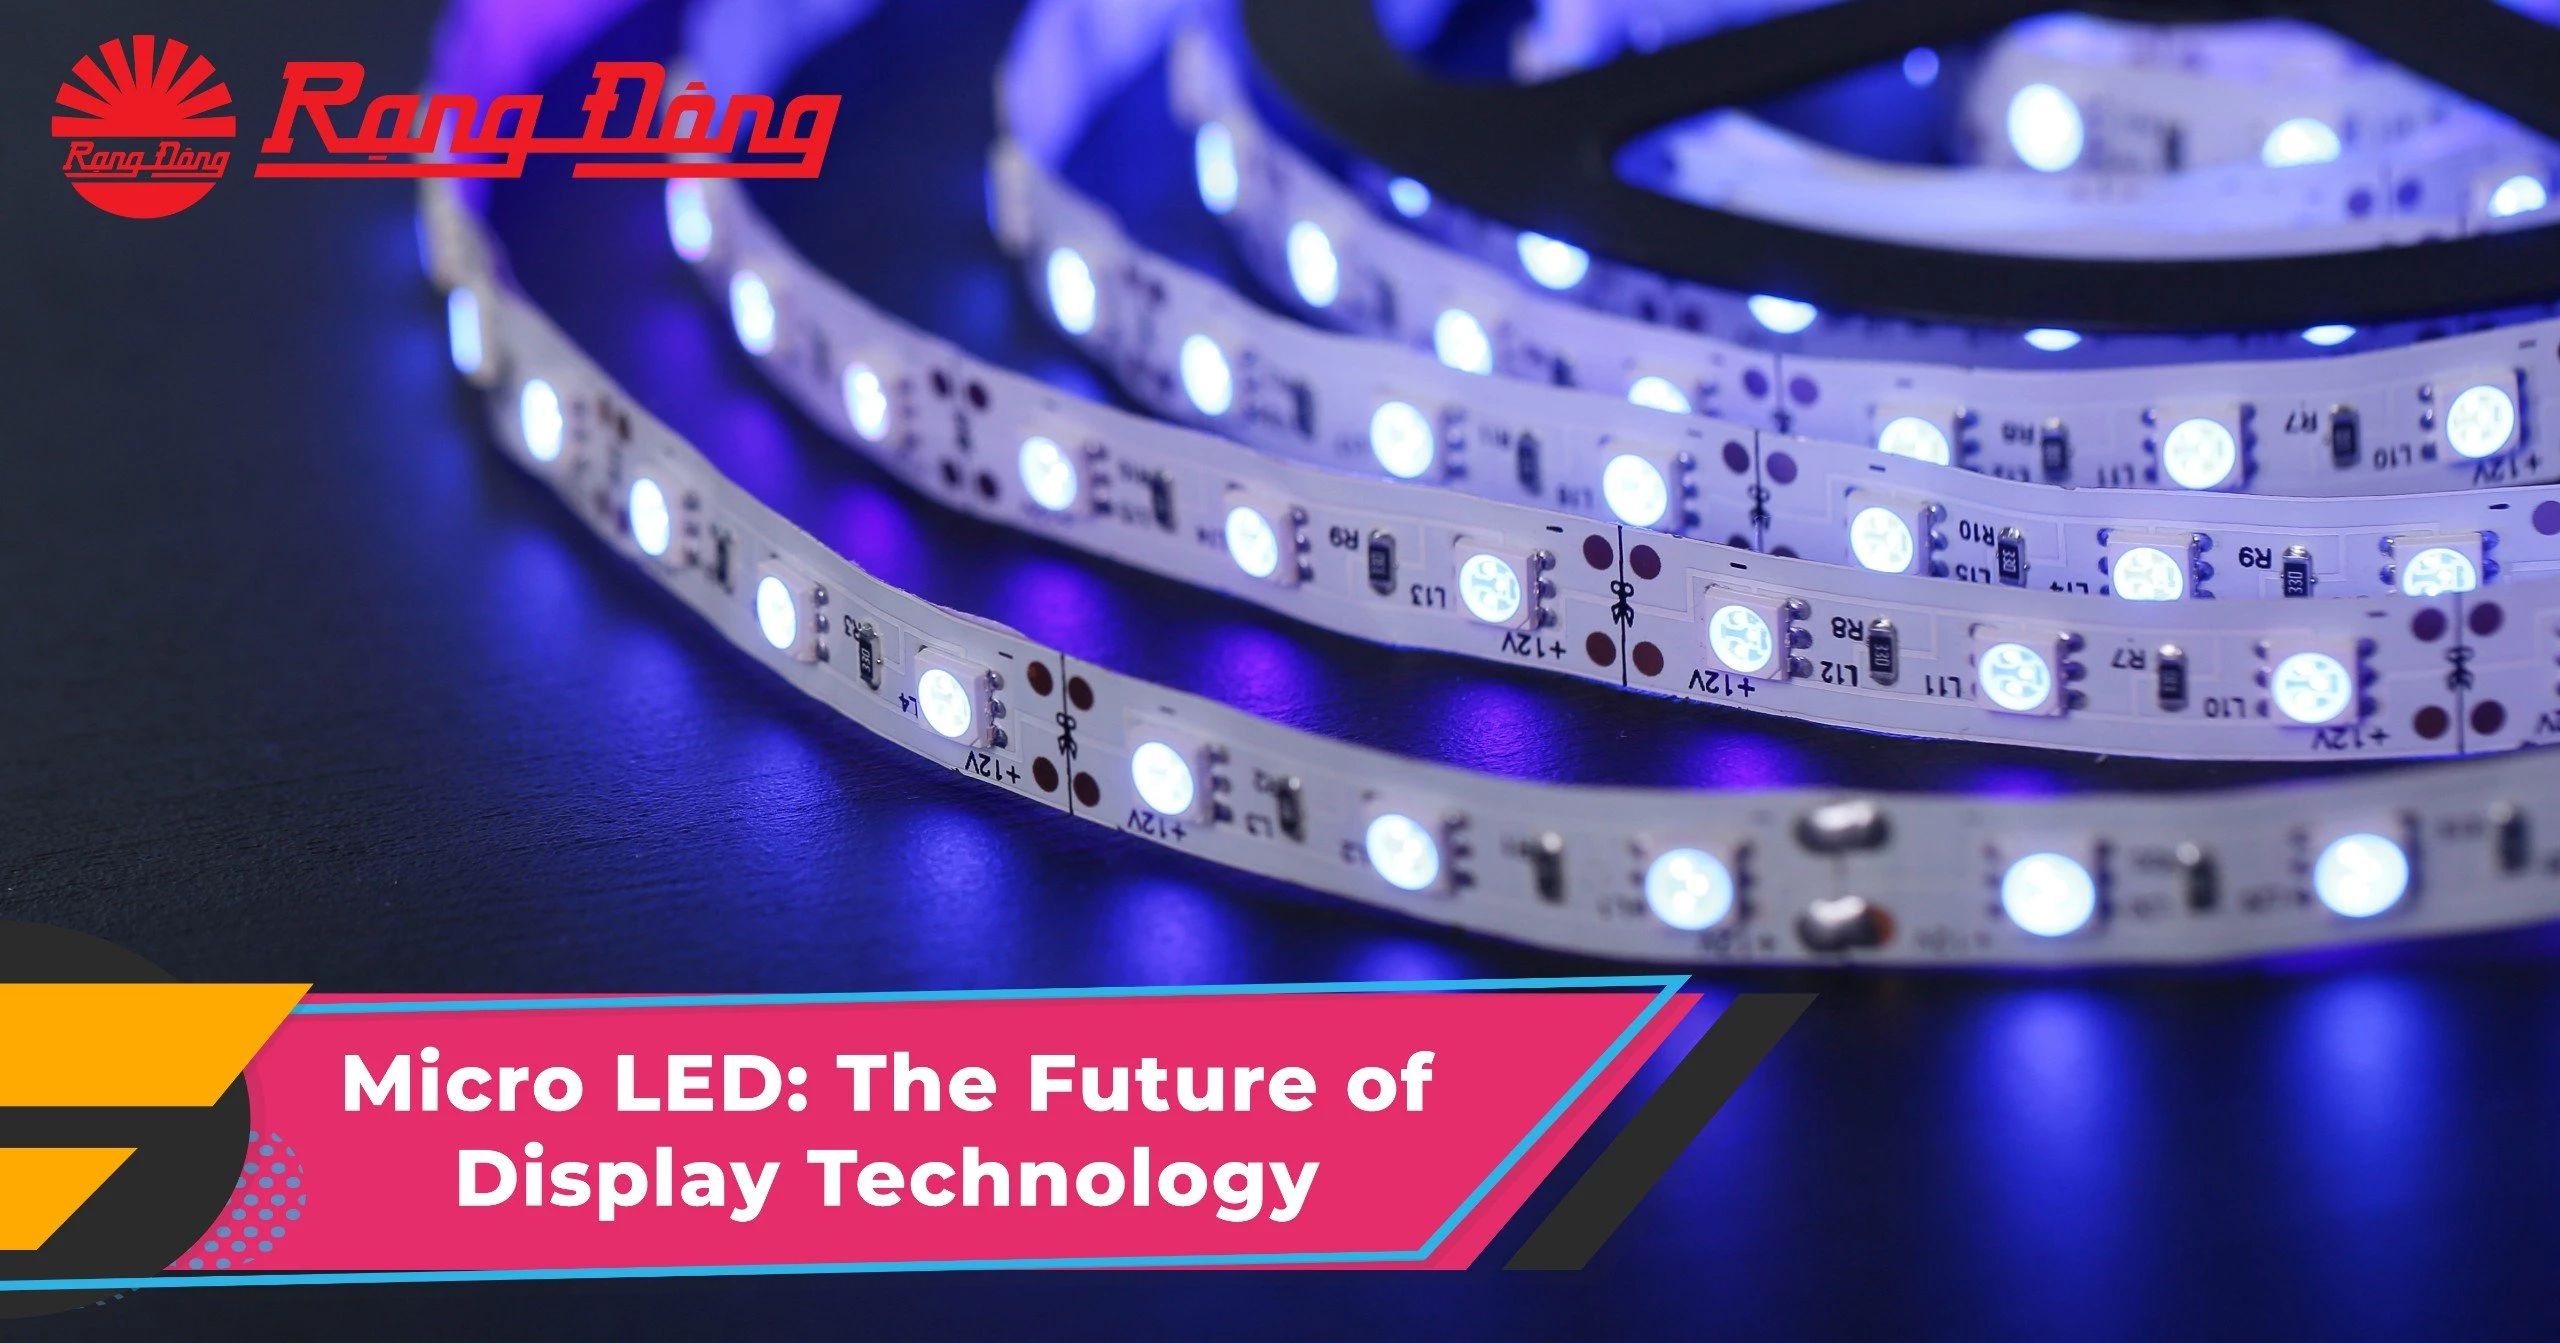 Micro LED: The Future of Display Technology